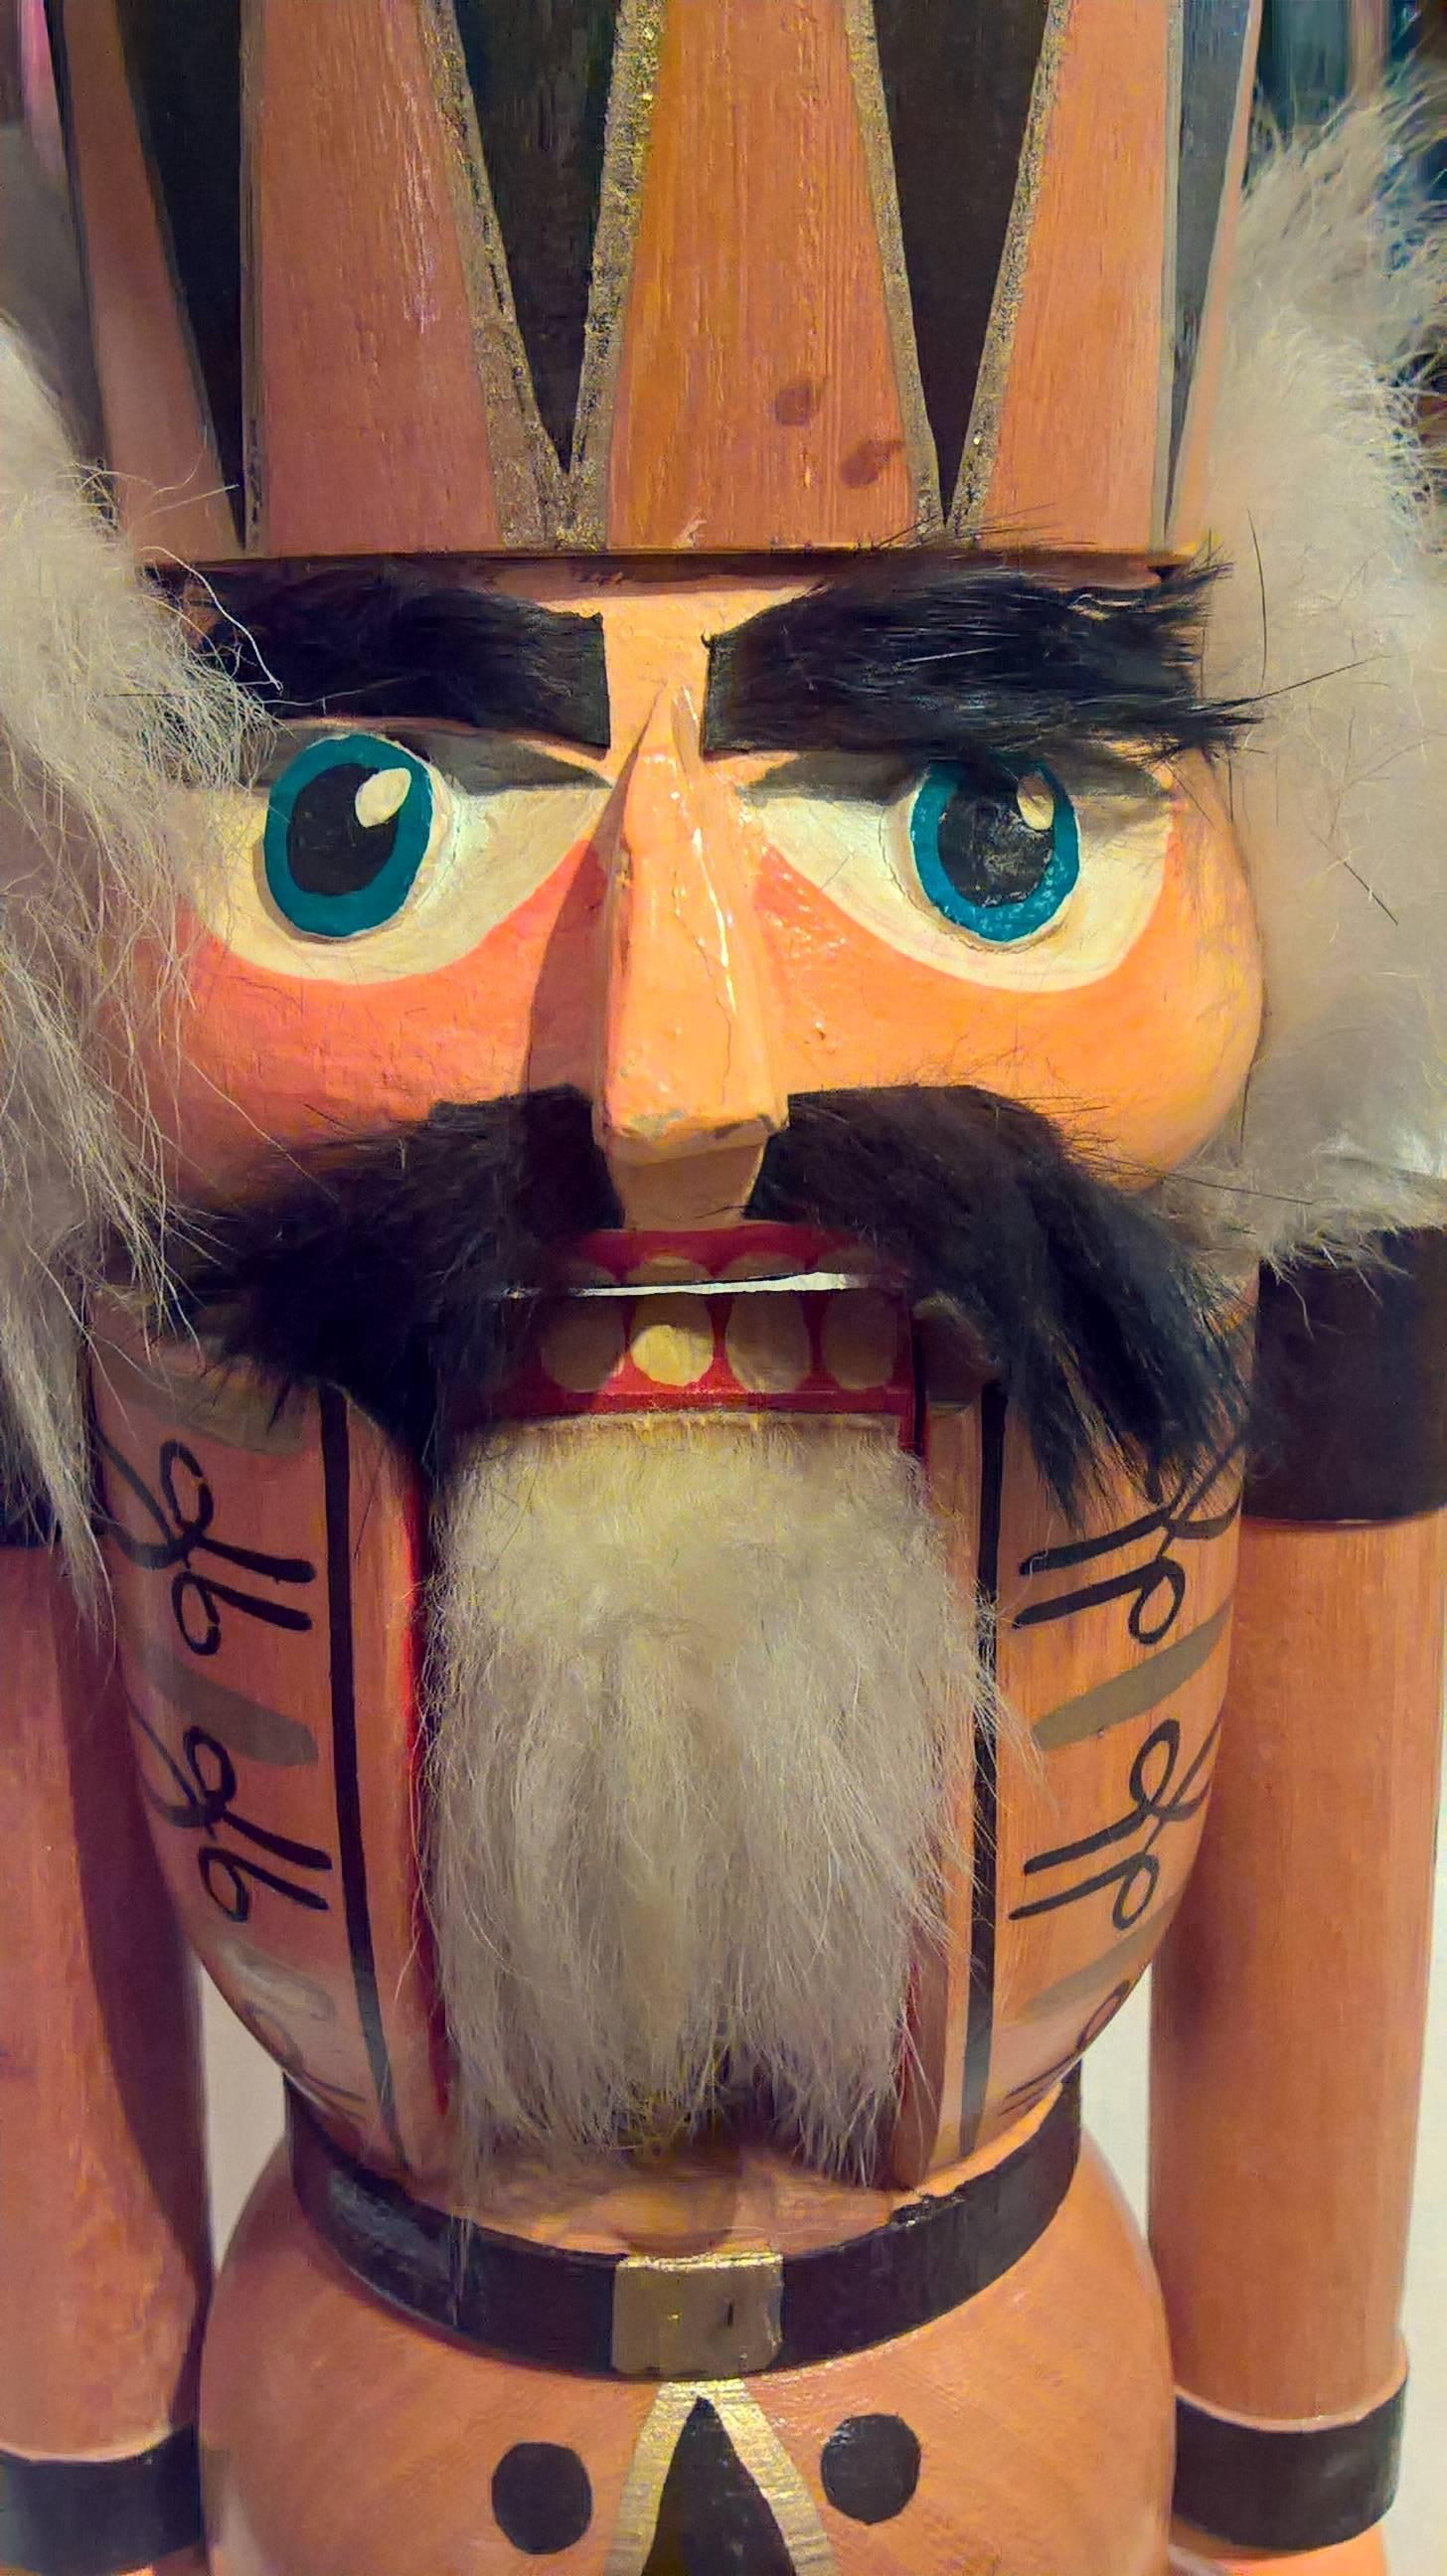 Large wooden nutcracker figure from the Erzgebirge. The region Erzgebirge formerly Eastern Germany is famous for this special kind of nutcrackers, where intricate carving has been their home. Completely hand painted and decorated with faux fur.